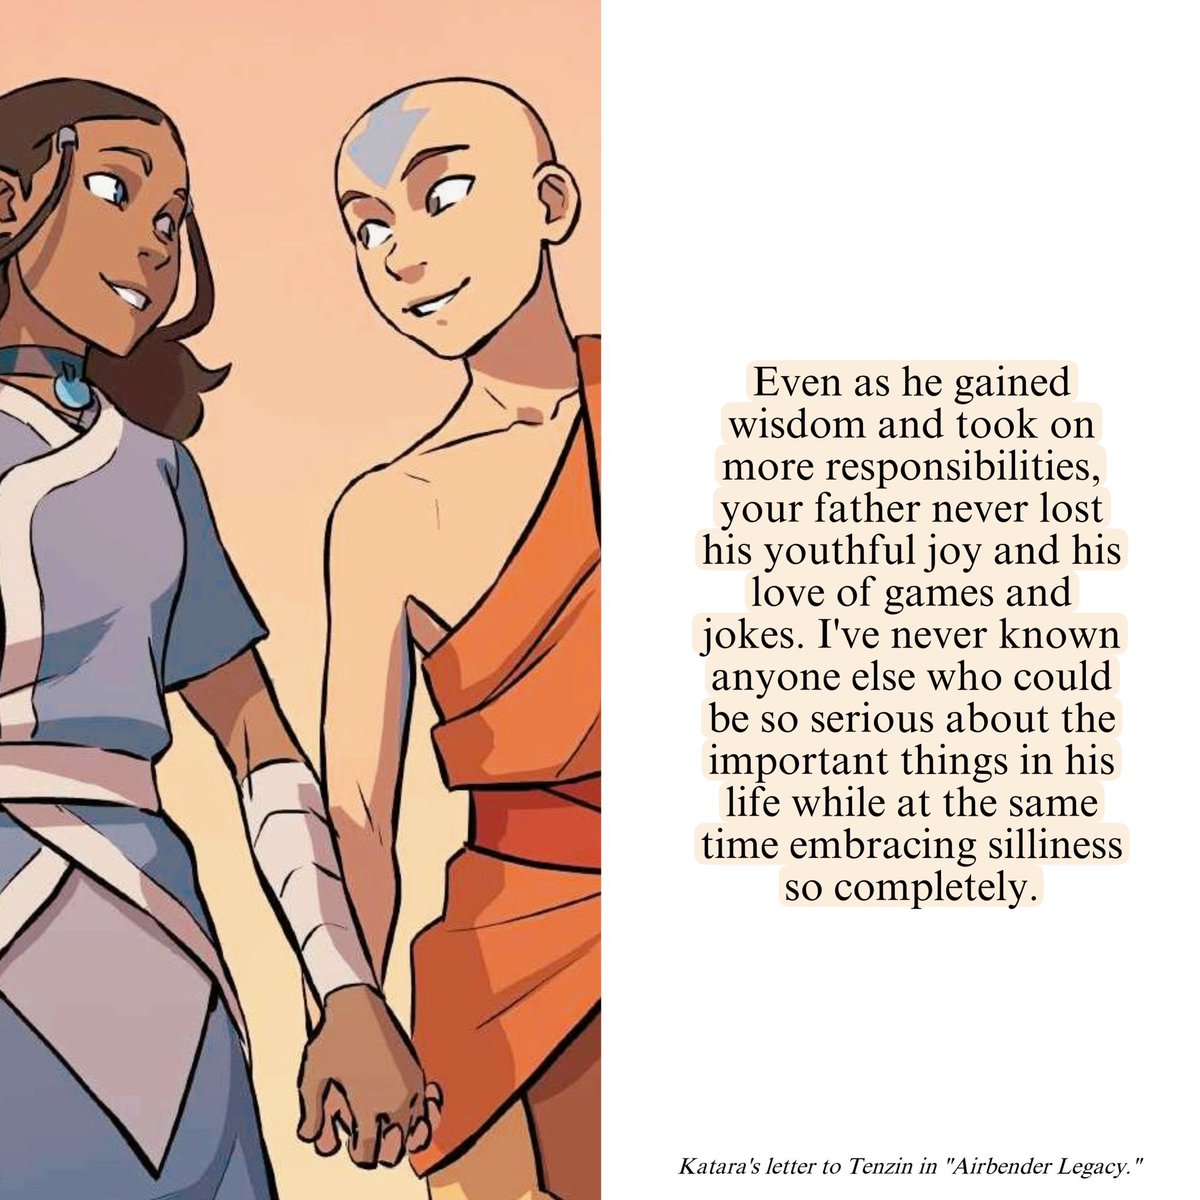 “kataang is bad” aang tells their five year old son that he remembers the kiss that began their relationship “like it was yesterday” and katara tells their five year old son that she fell in love with aang’s youthful joy & his ability to bring fun back in her life.